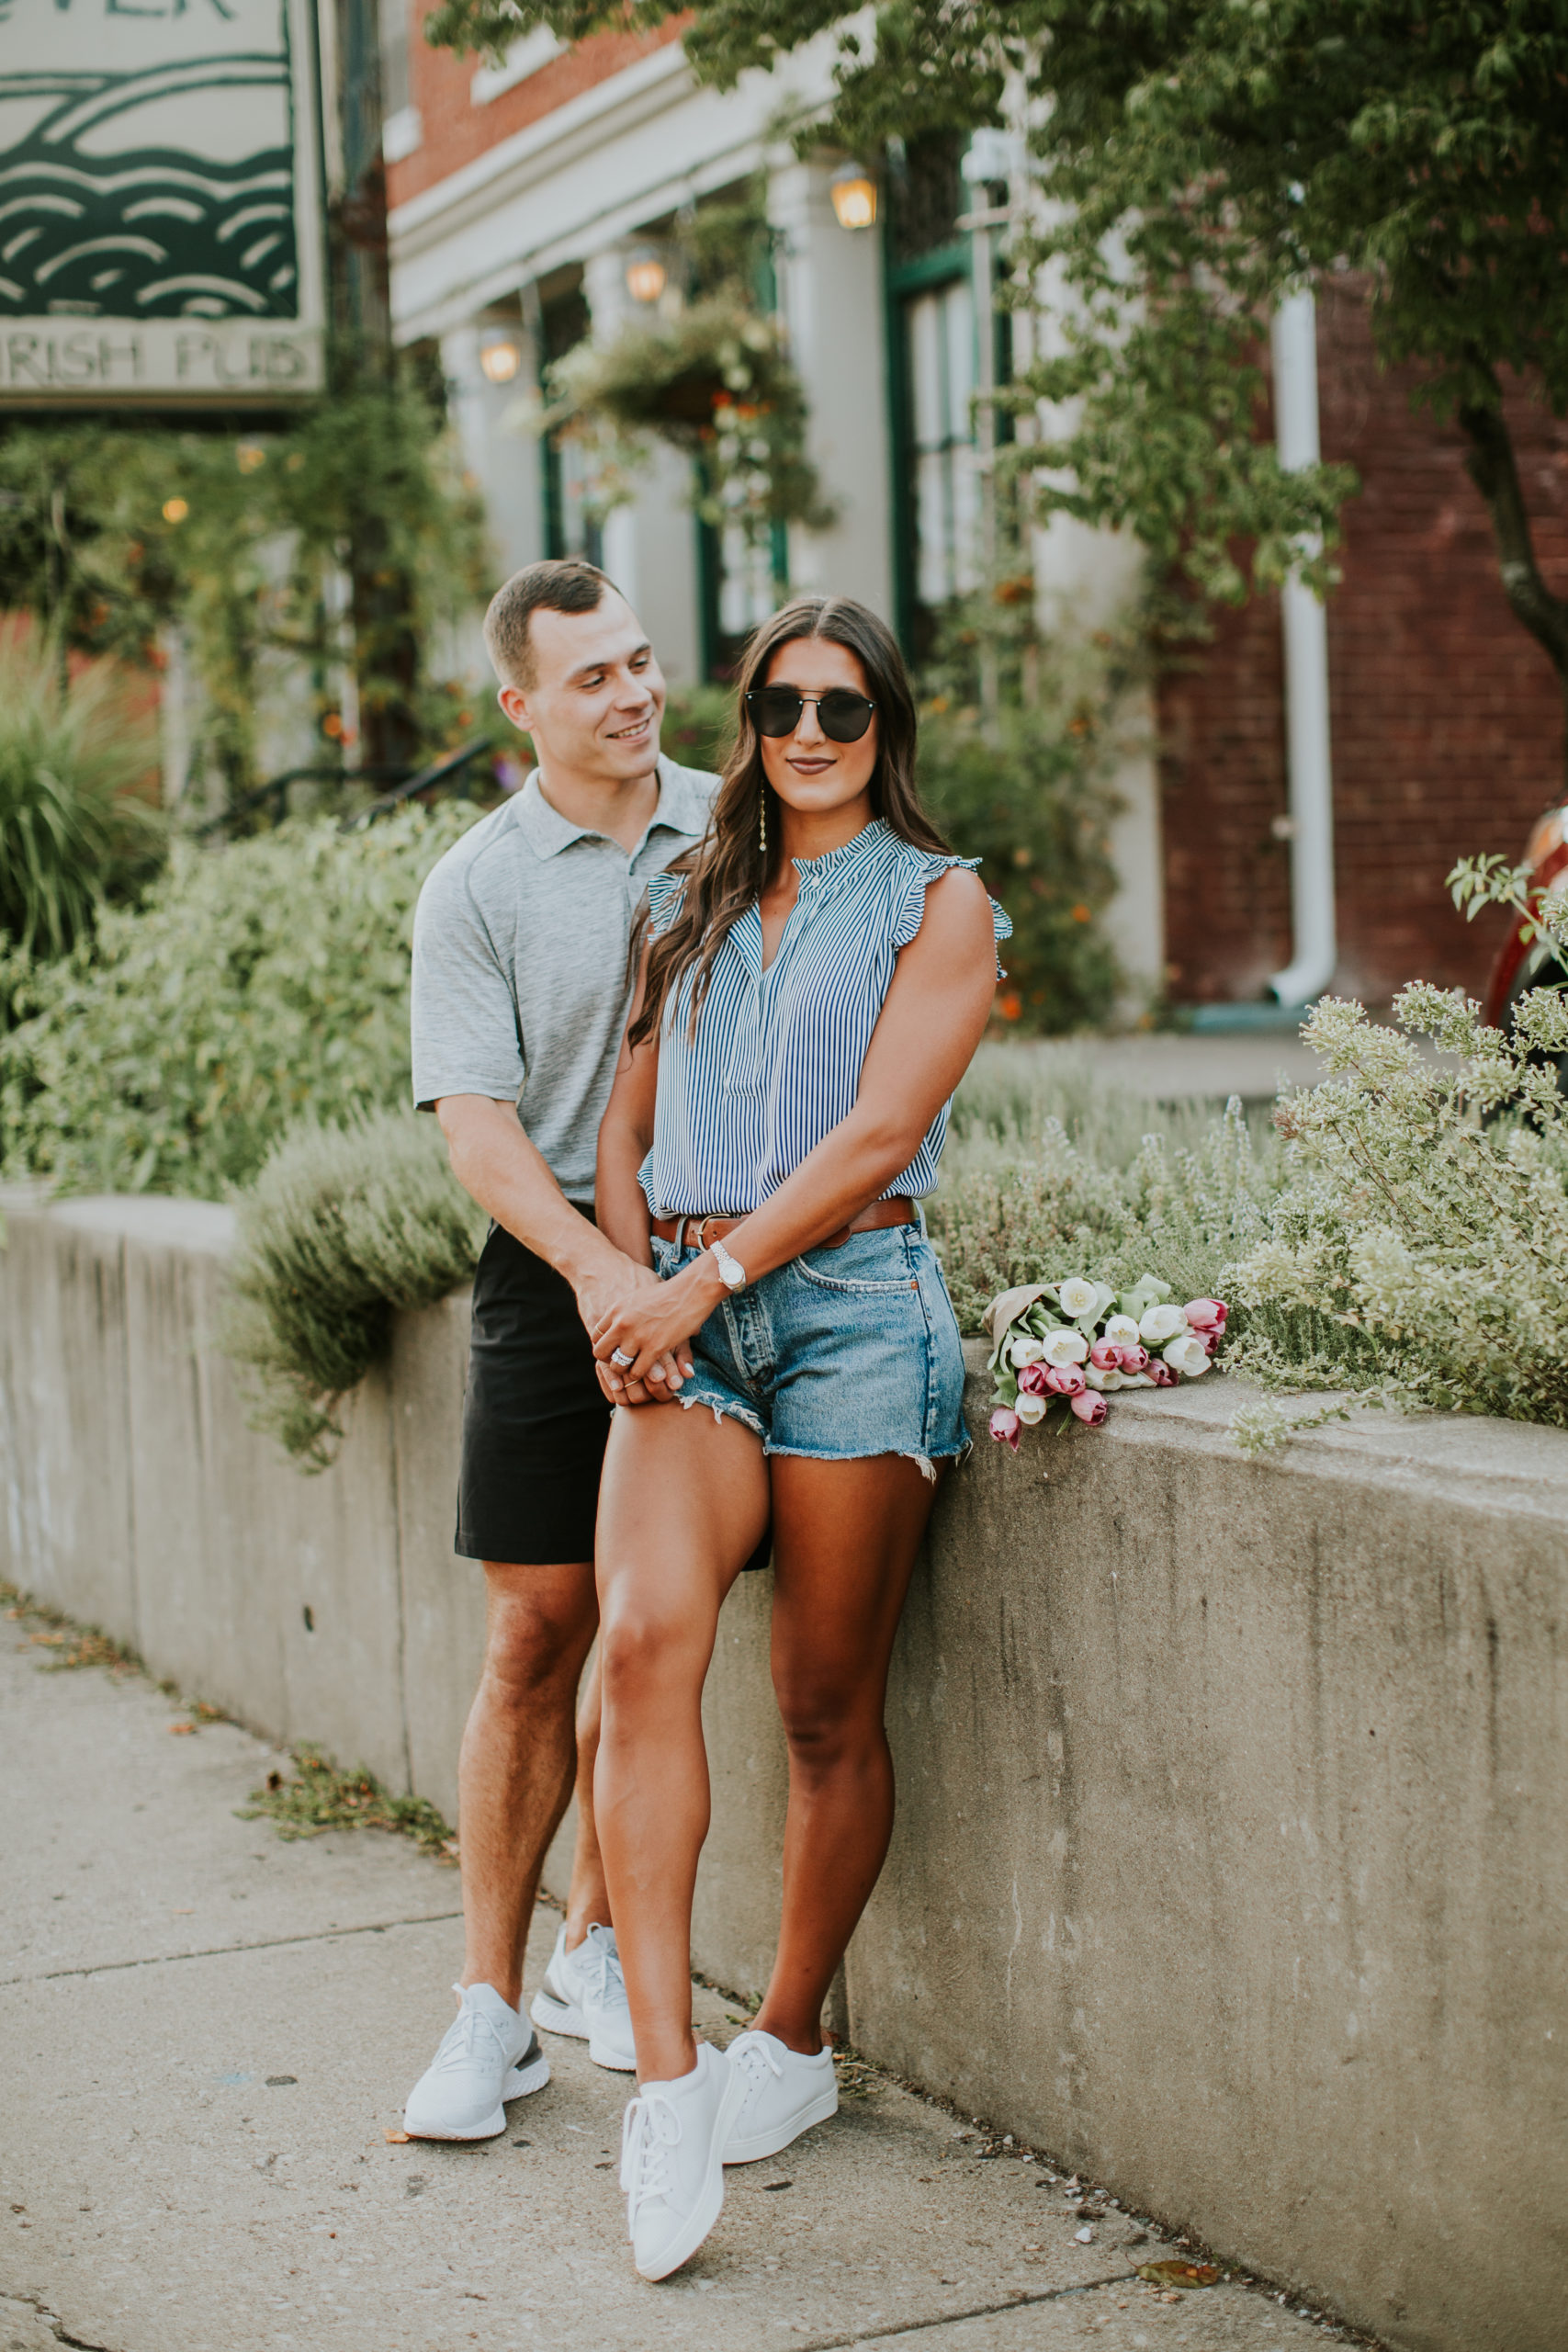 favorite adult board games, favorite board games, spring style, couples style, men's style, golf shirt, peter millar, ruffle top, jordan white louisville // grace white a southern drawl